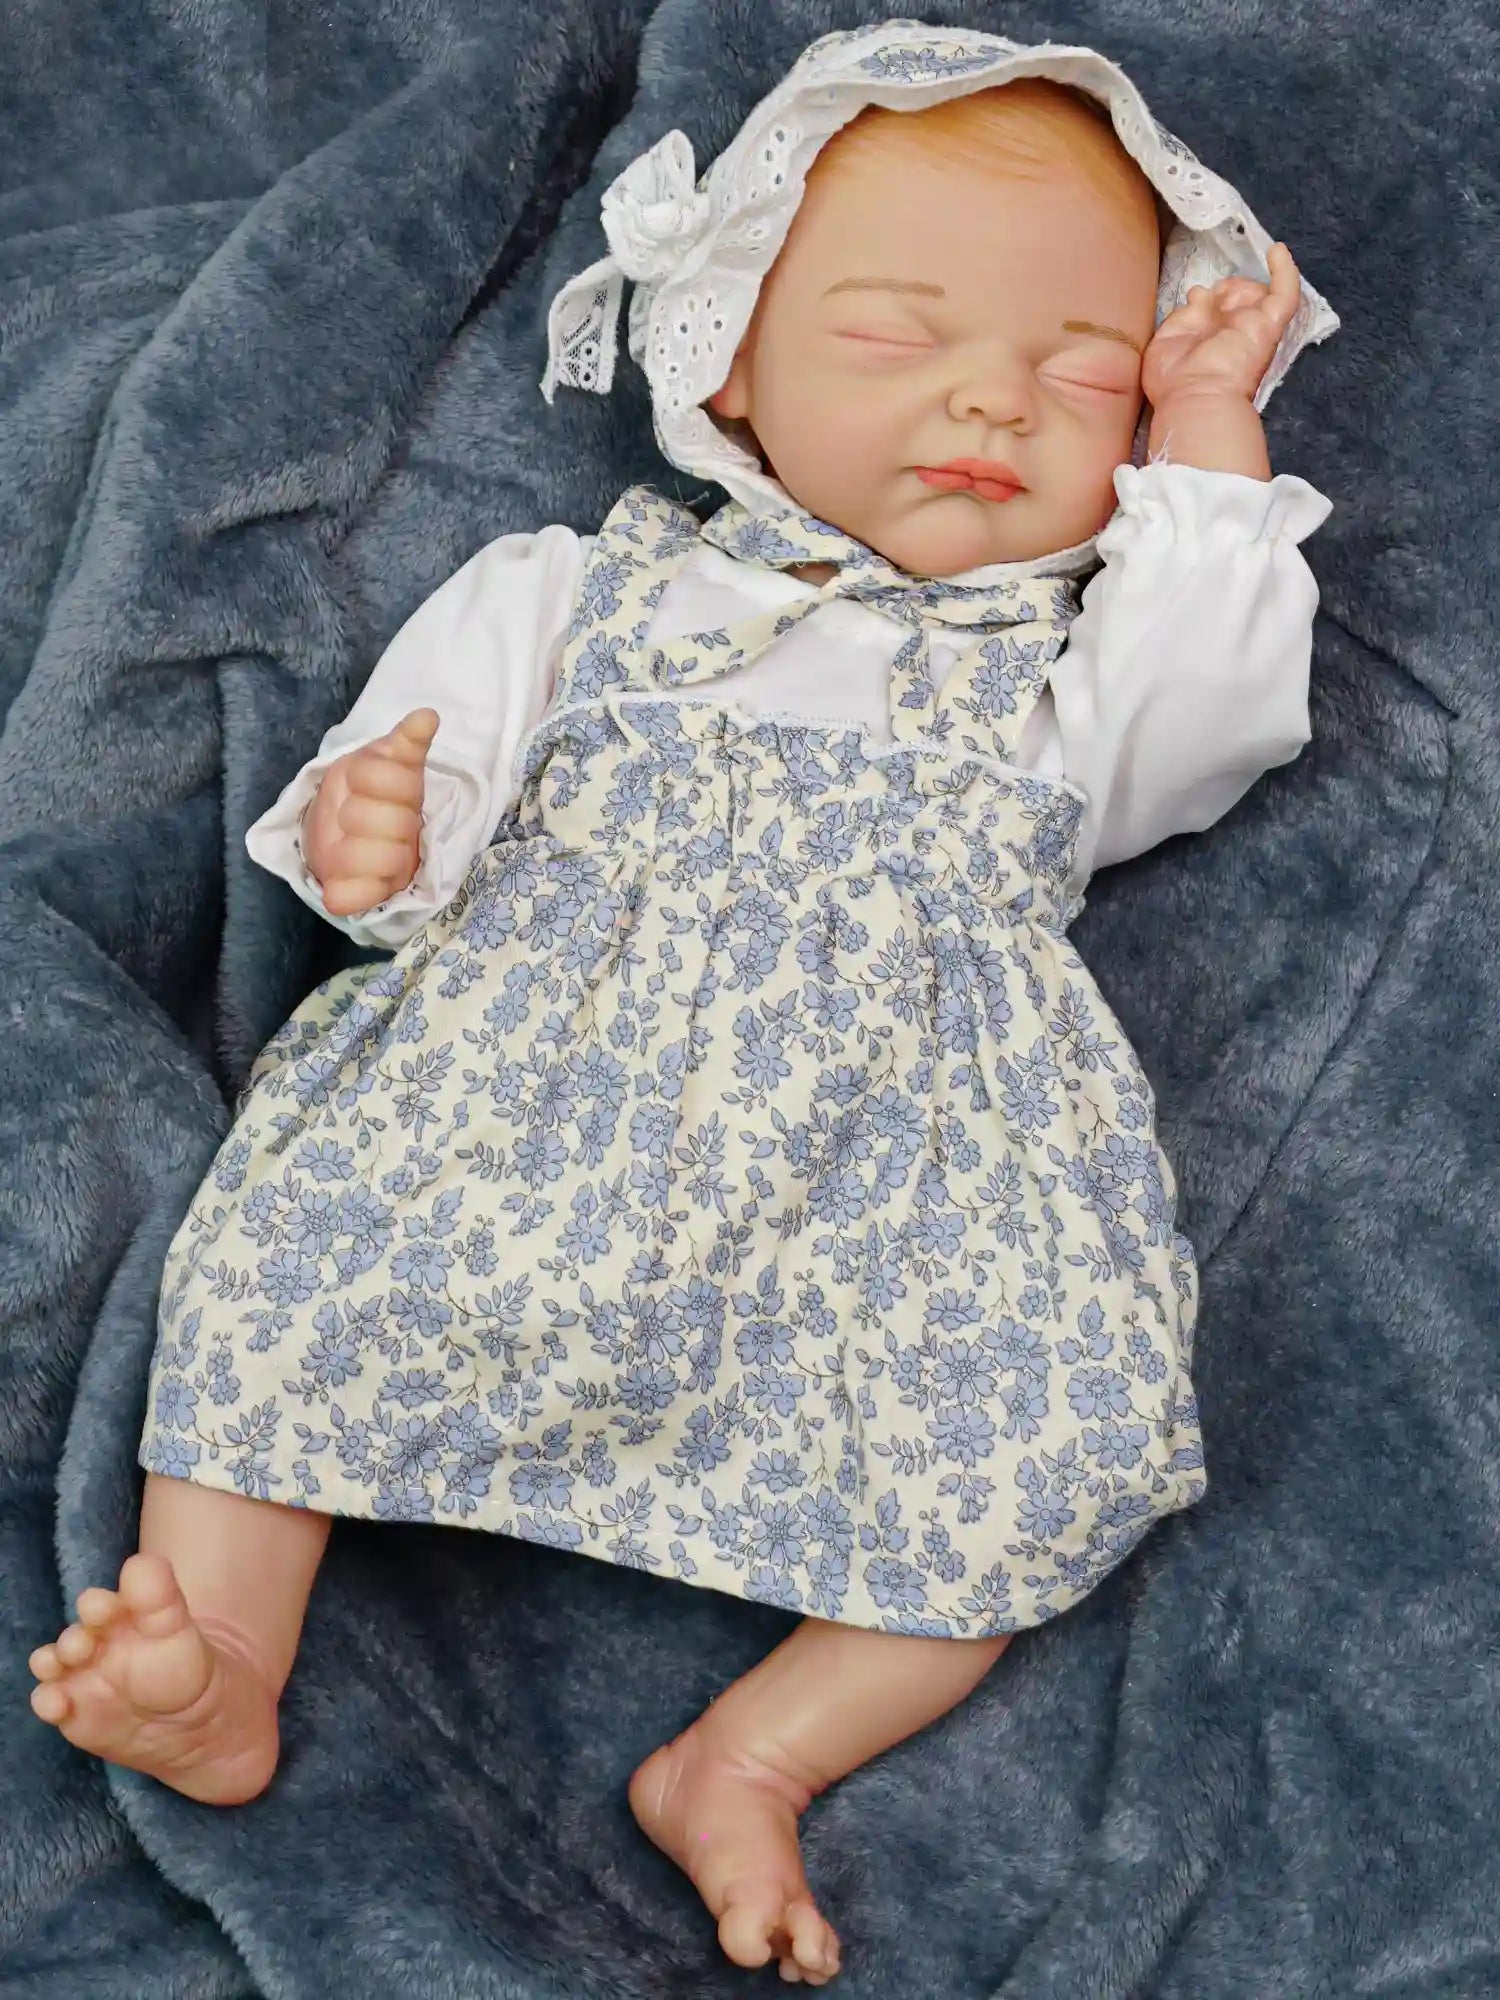 Another close-up of the first baby doll, where she appears to be in a deep sleep, her head adorned with the pink headband, and the colorful jumpsuit visible.